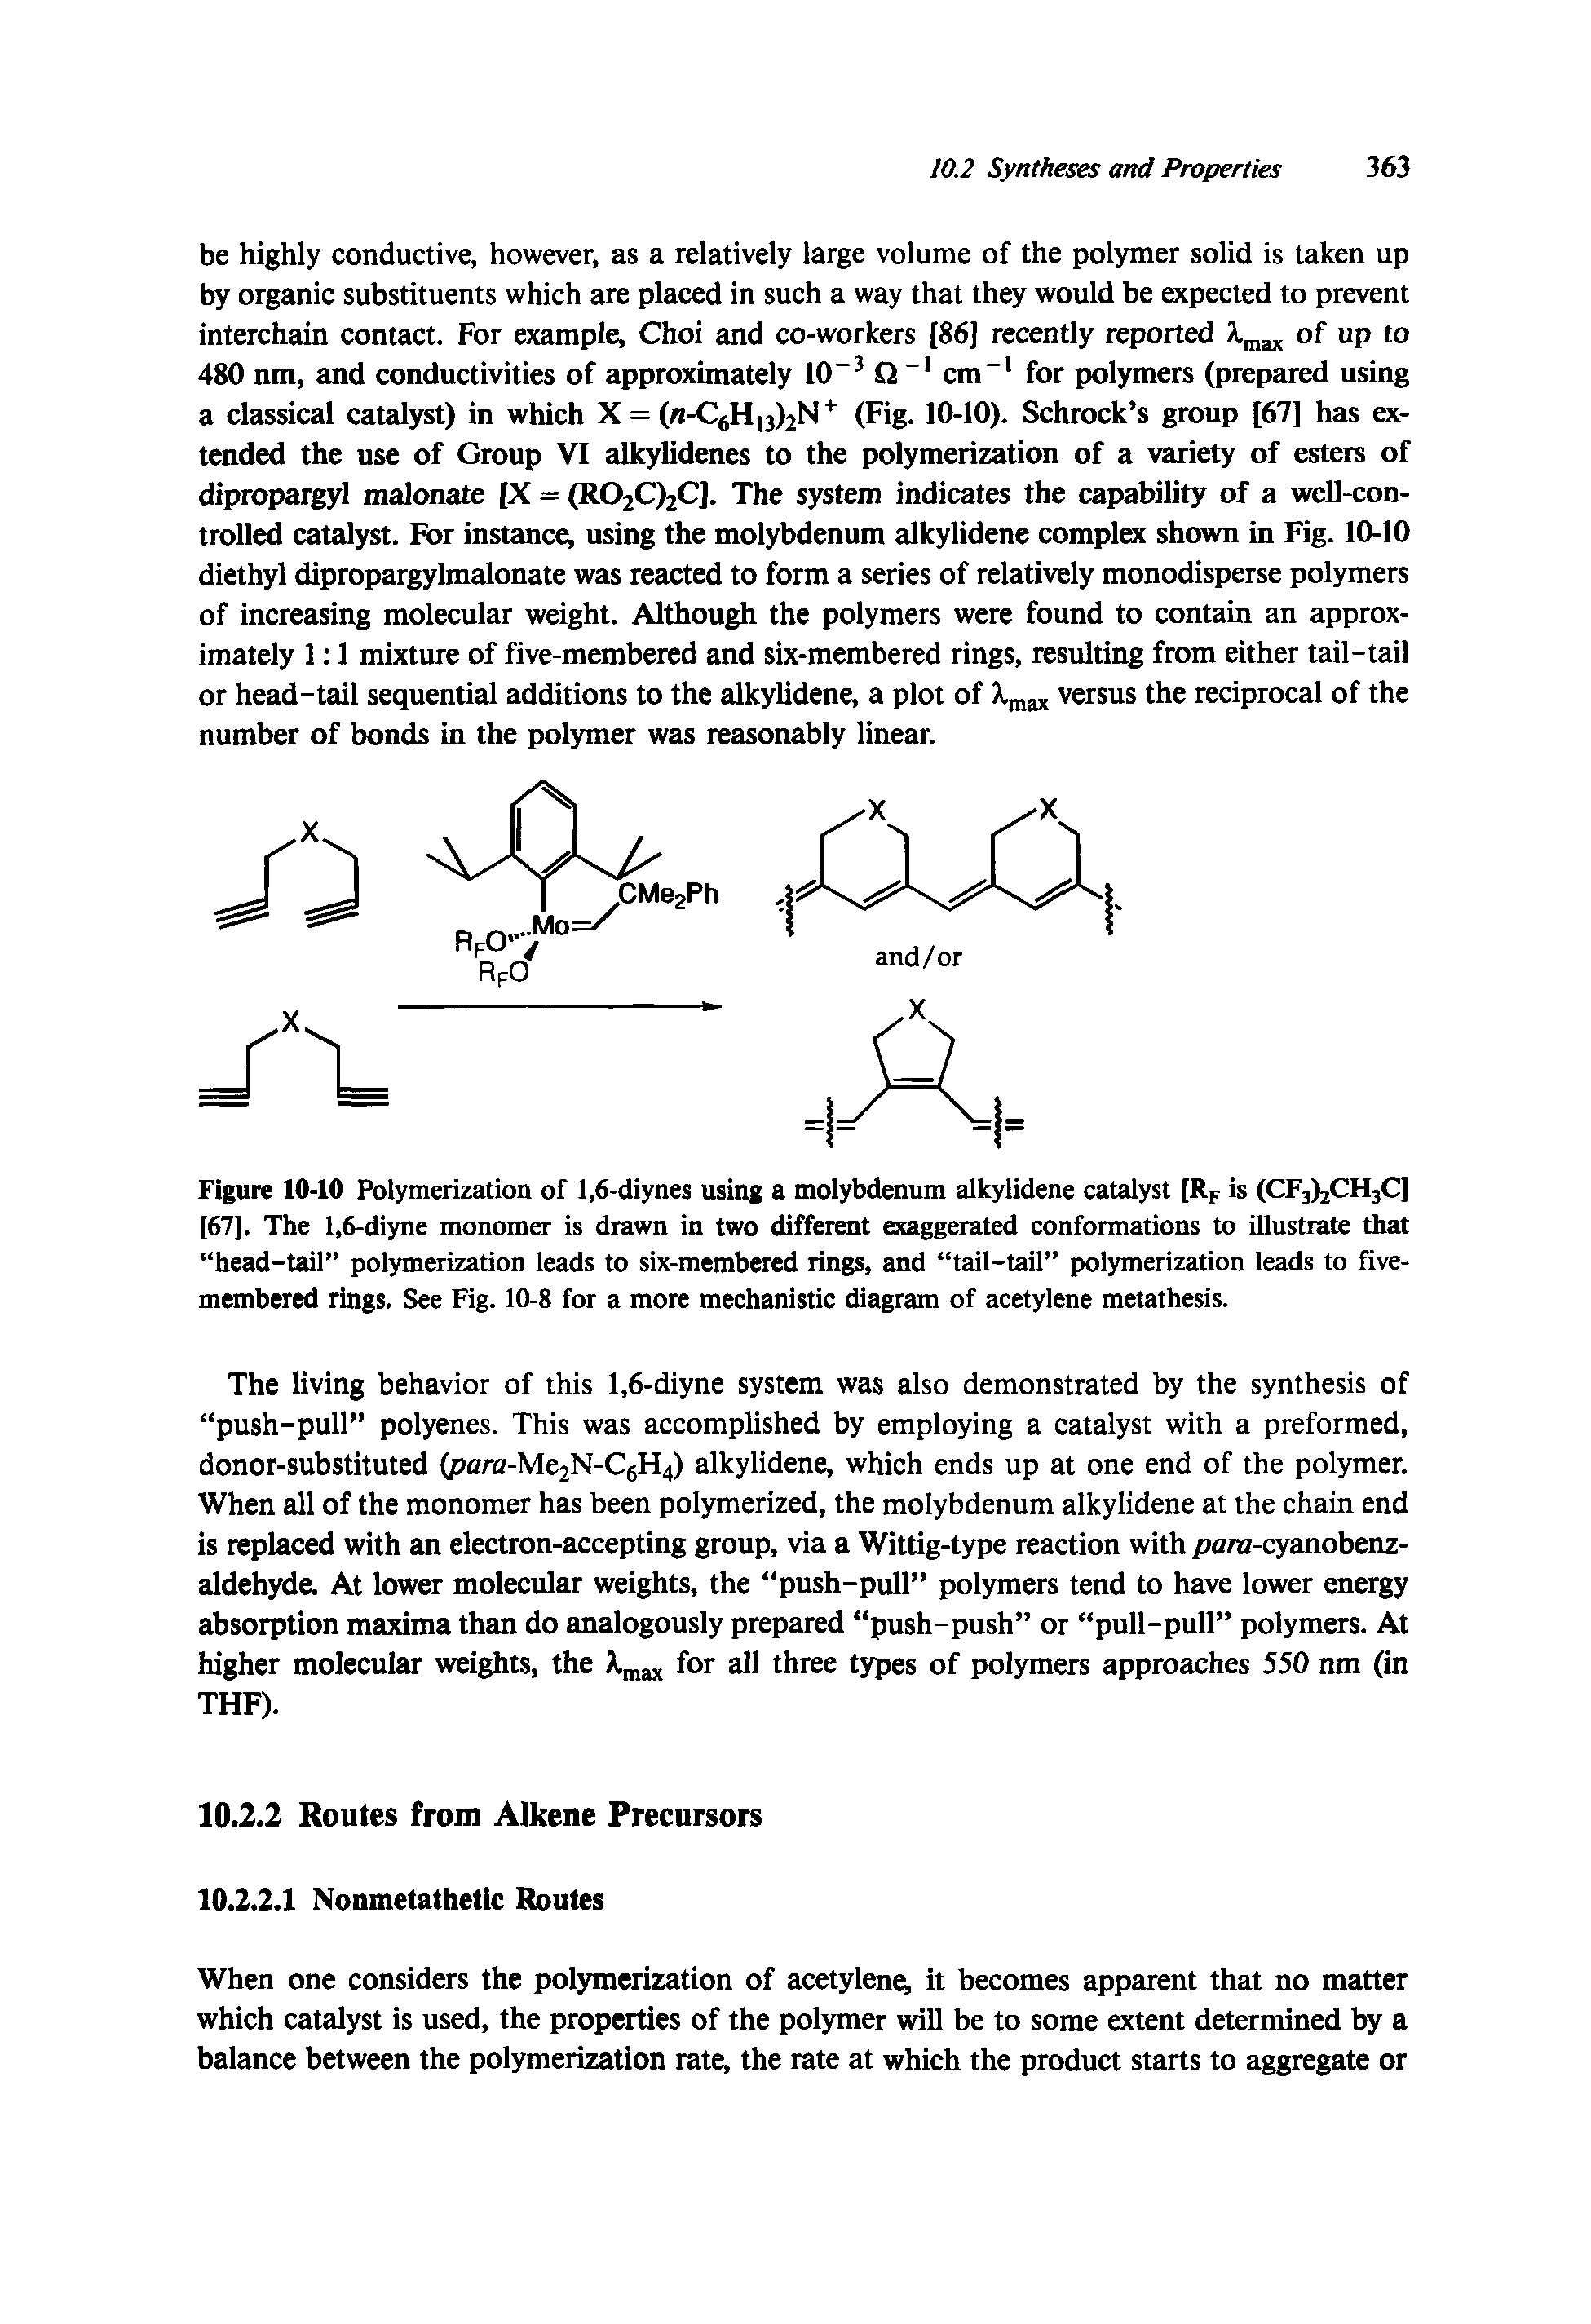 Figure 10-10 Polymerization of 1,6-diynes using a molybdenum alkylidene catalyst [Rp is (CFjljCHjC] [67]. The 1,6-diyne monomer is drawn in two different exaggerated conformations to illustrate that head-tail polymerization leads to six-membered rings, and tail-tail polymerization leads to five-membered rings. See Fig. 10-8 for a more mechanistic diagram of acetylene metathesis.